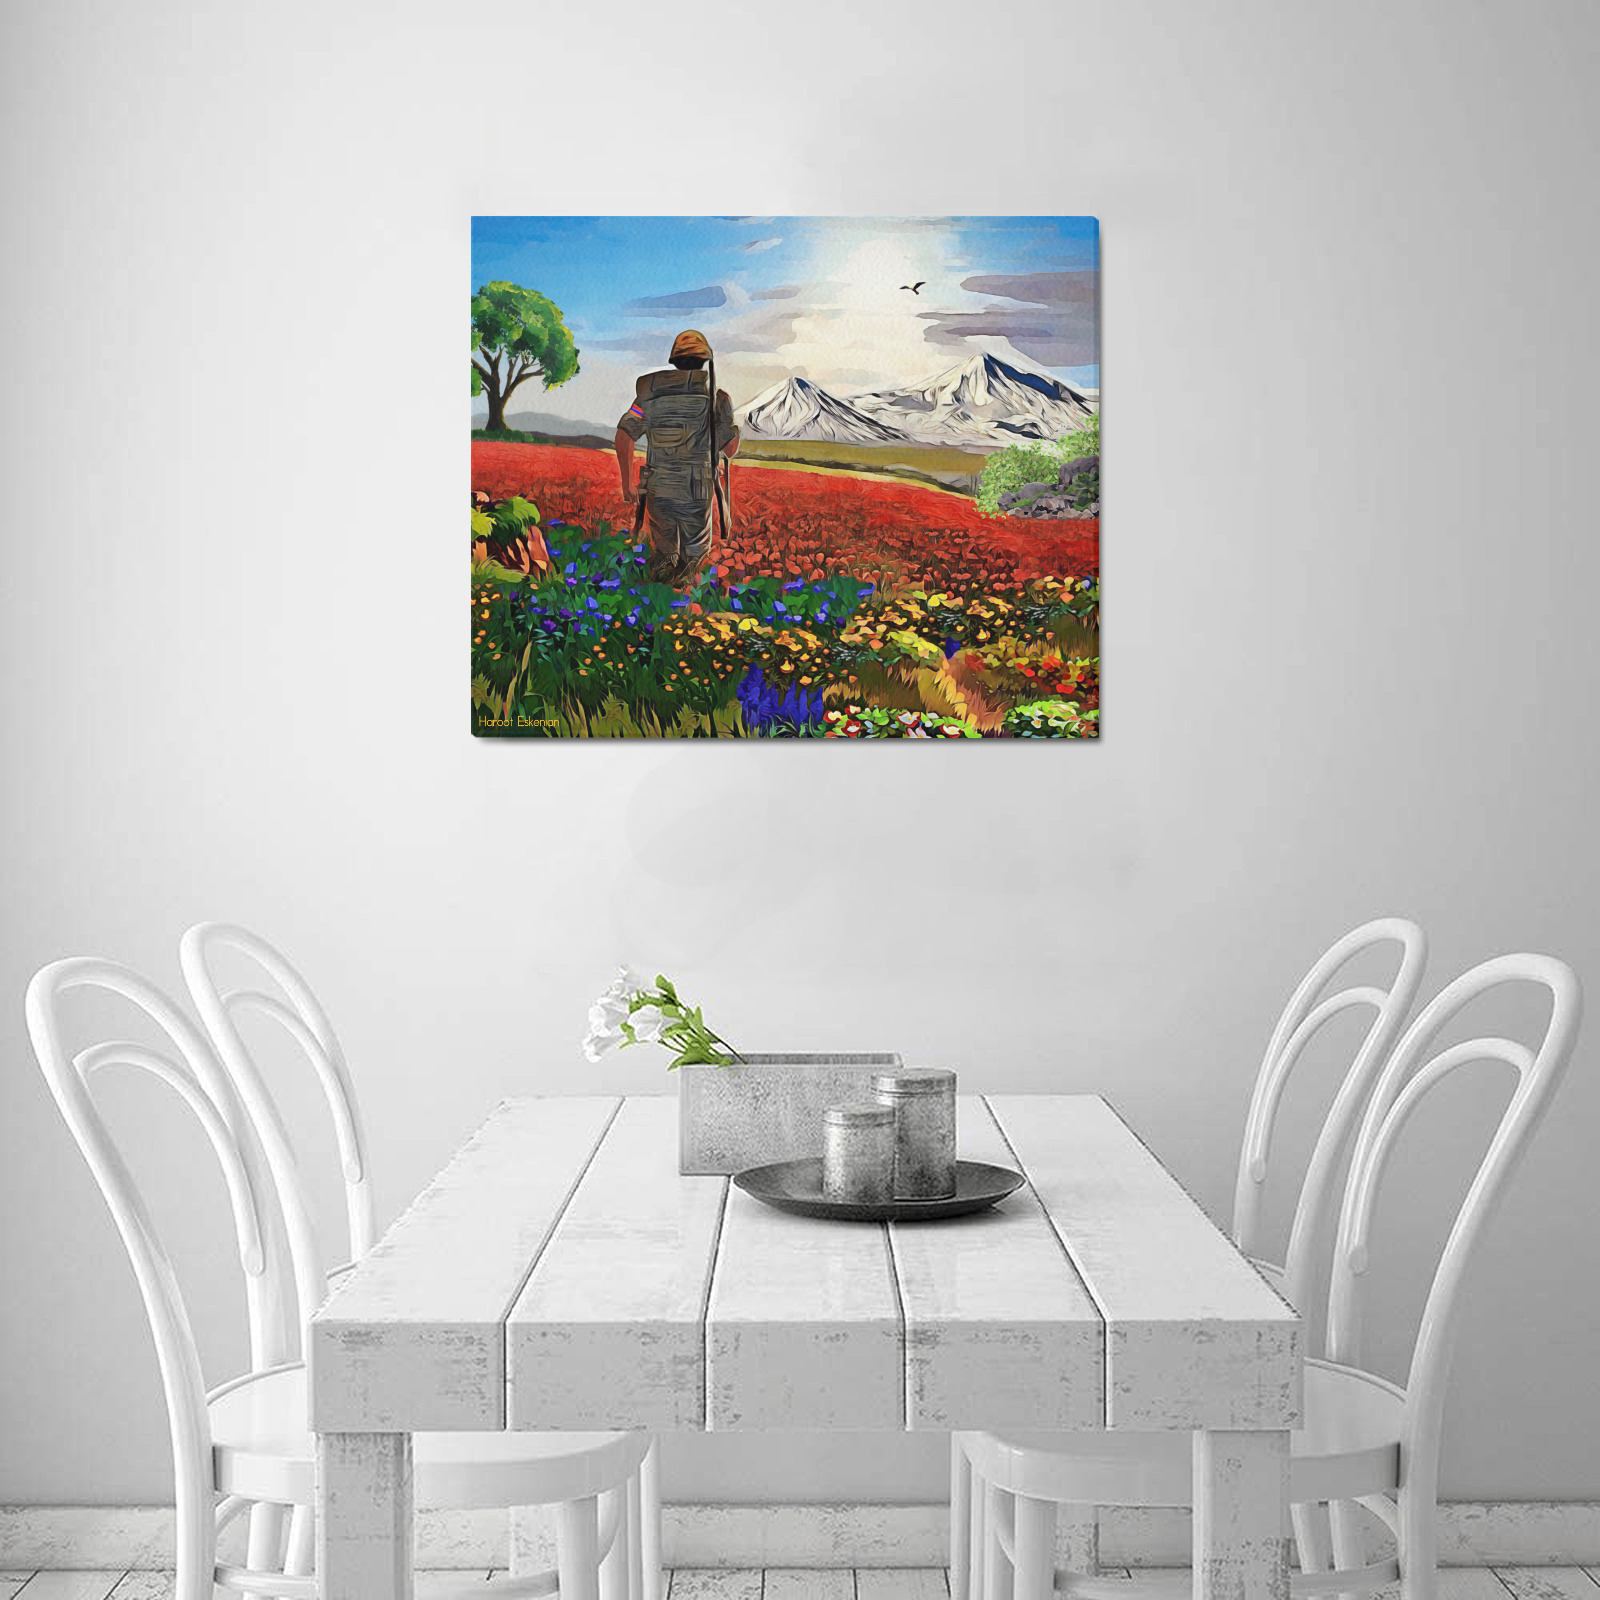 The Soldier Frame Canvas Print 24"x20"